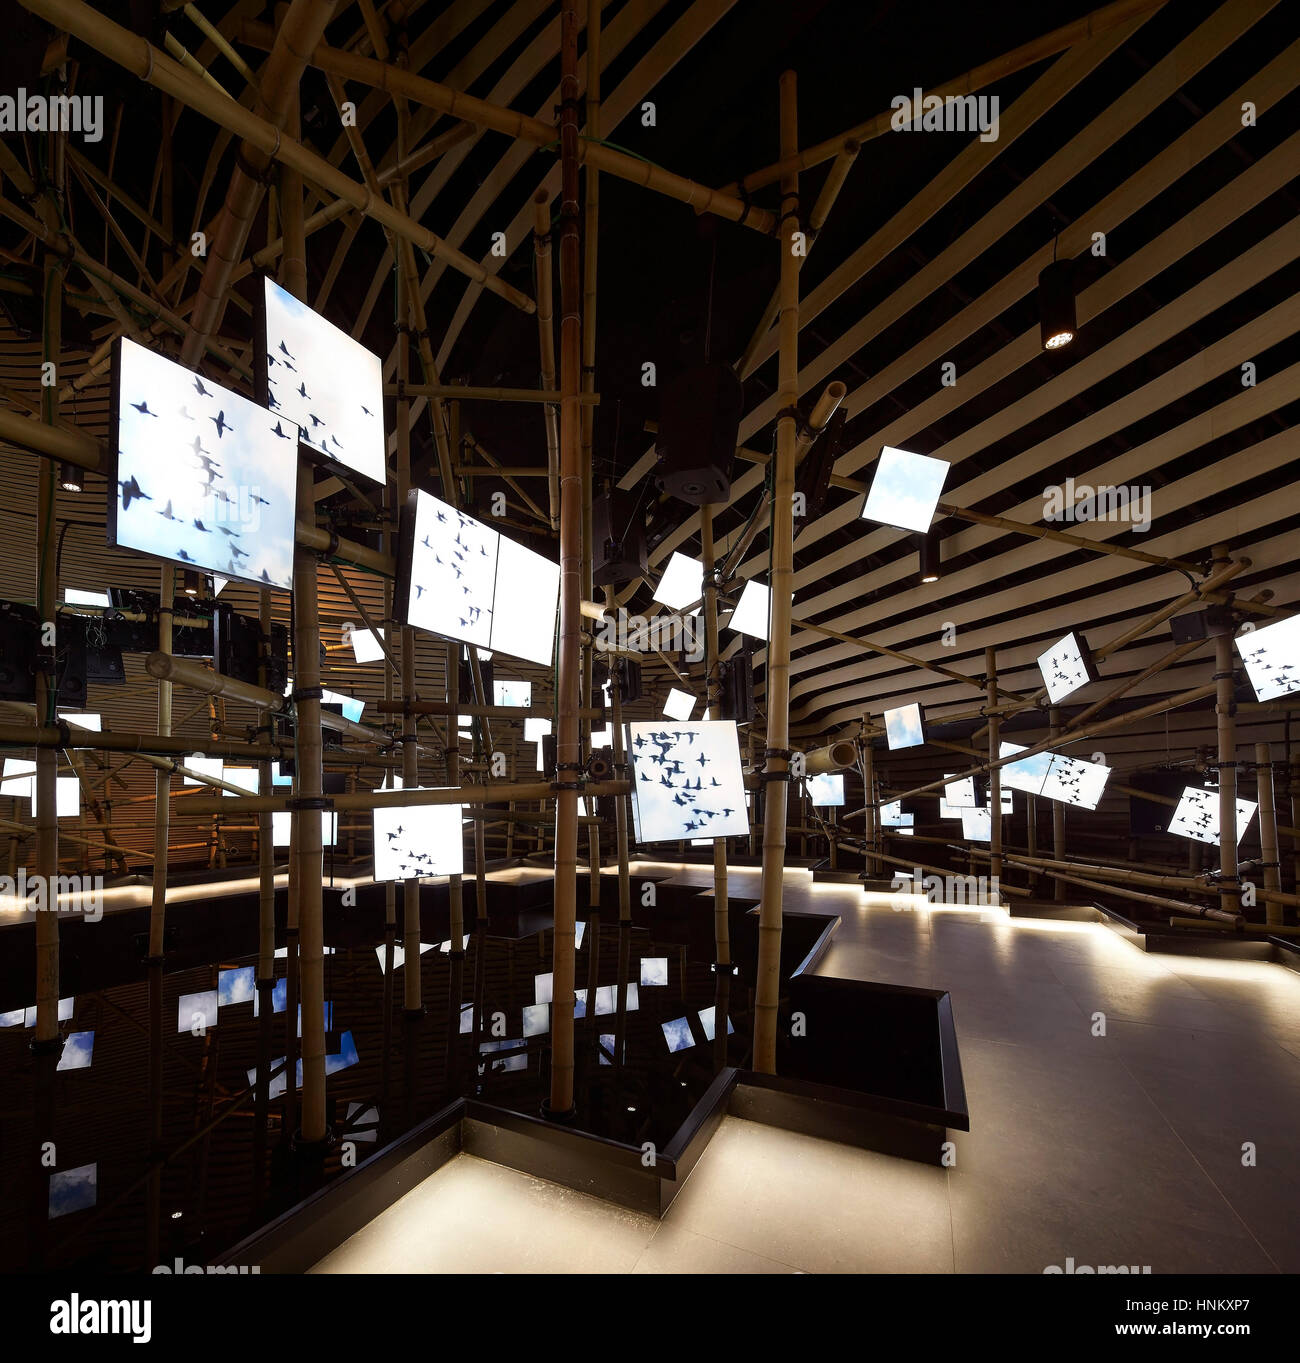 Exhibition space with mounted screens. Milan Expo 2015, Vanke Pavilion, Milan, Italy. Architect: Libeskind, 2015. Stock Photo